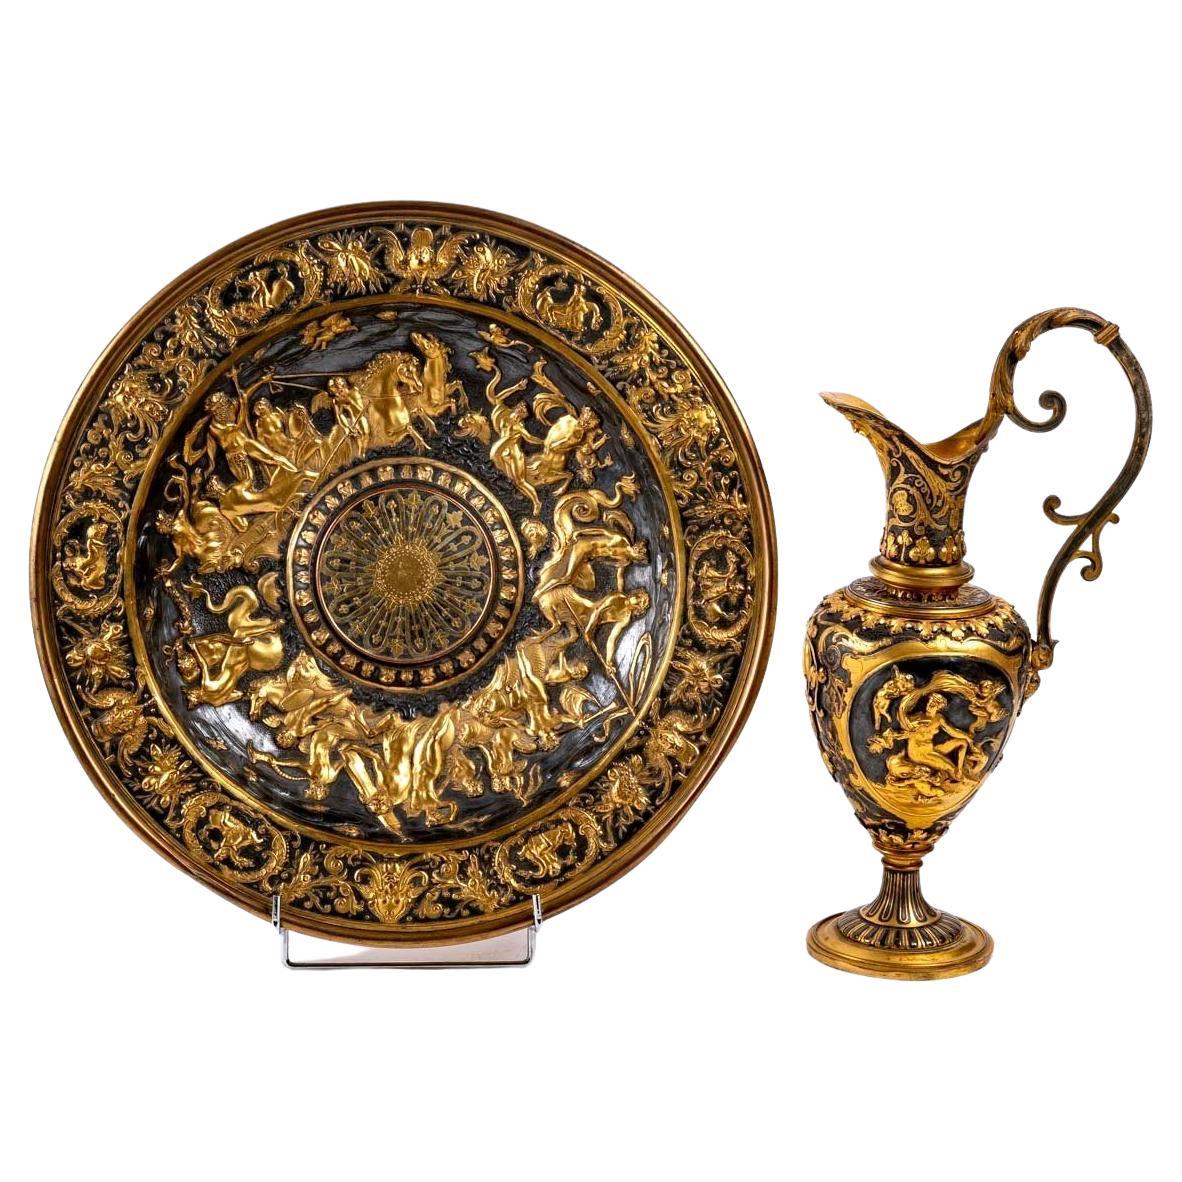 Ewer with Its Patinated and Gilded Brass Basin, 19th Century